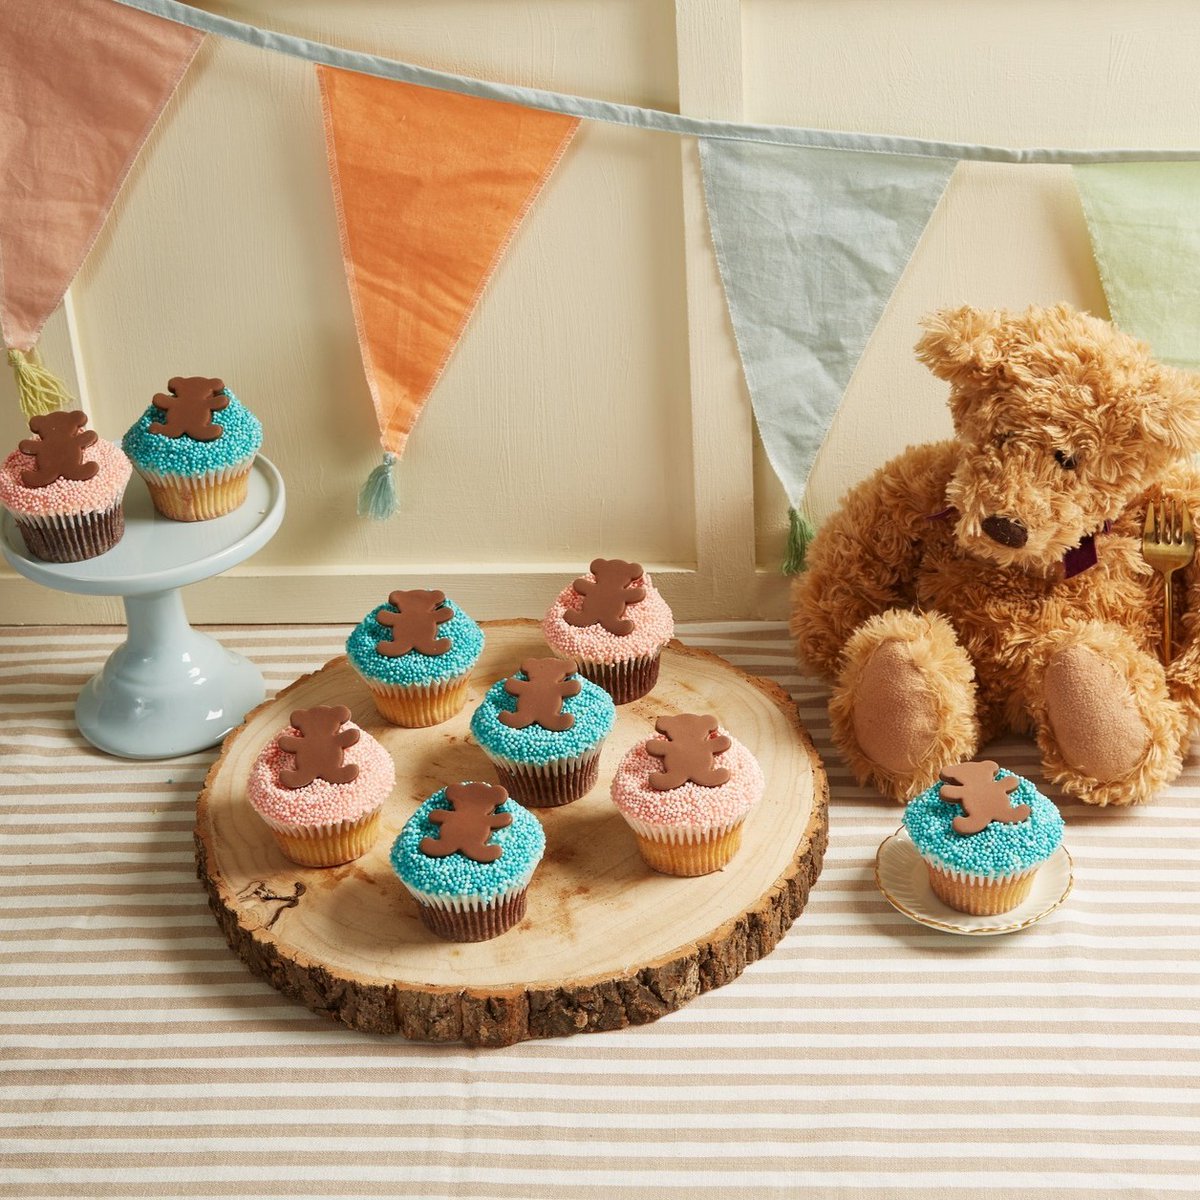 Celebrate your little ones with the adorable new teddy bear sprinkle cakes from @hummingbbakery 🧸🧁 Choose from charming pink, vibrant blue or perhaps a mix of both!